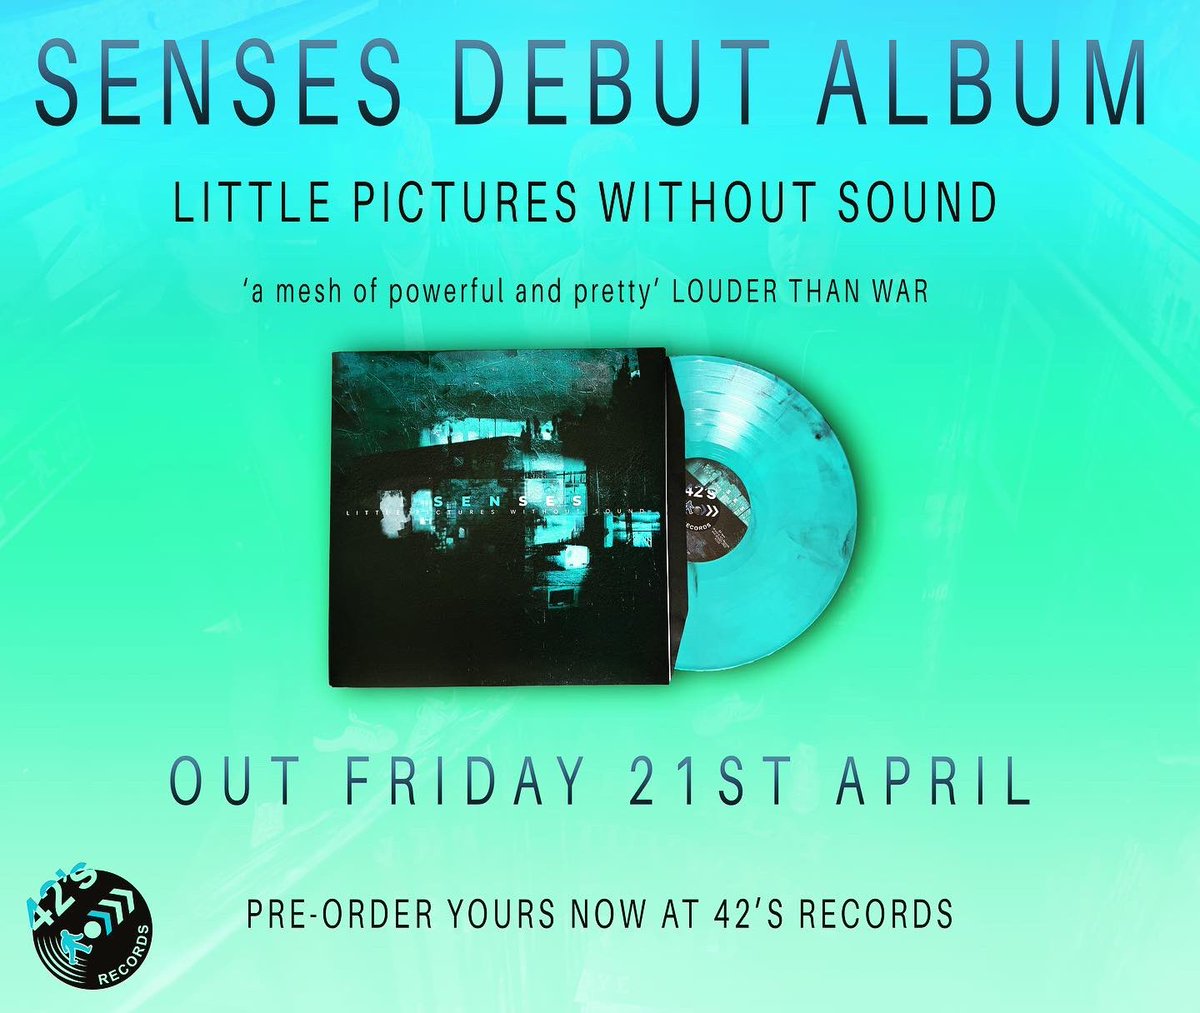 Pre-order available now at: lnk.to/SENSESCOV

If you can’t afford to buy a copy please feel free to like/re-tweet this post, it helps us spread the word and get to #1 next week! 🏆

Love you all. 

SENSES xxx